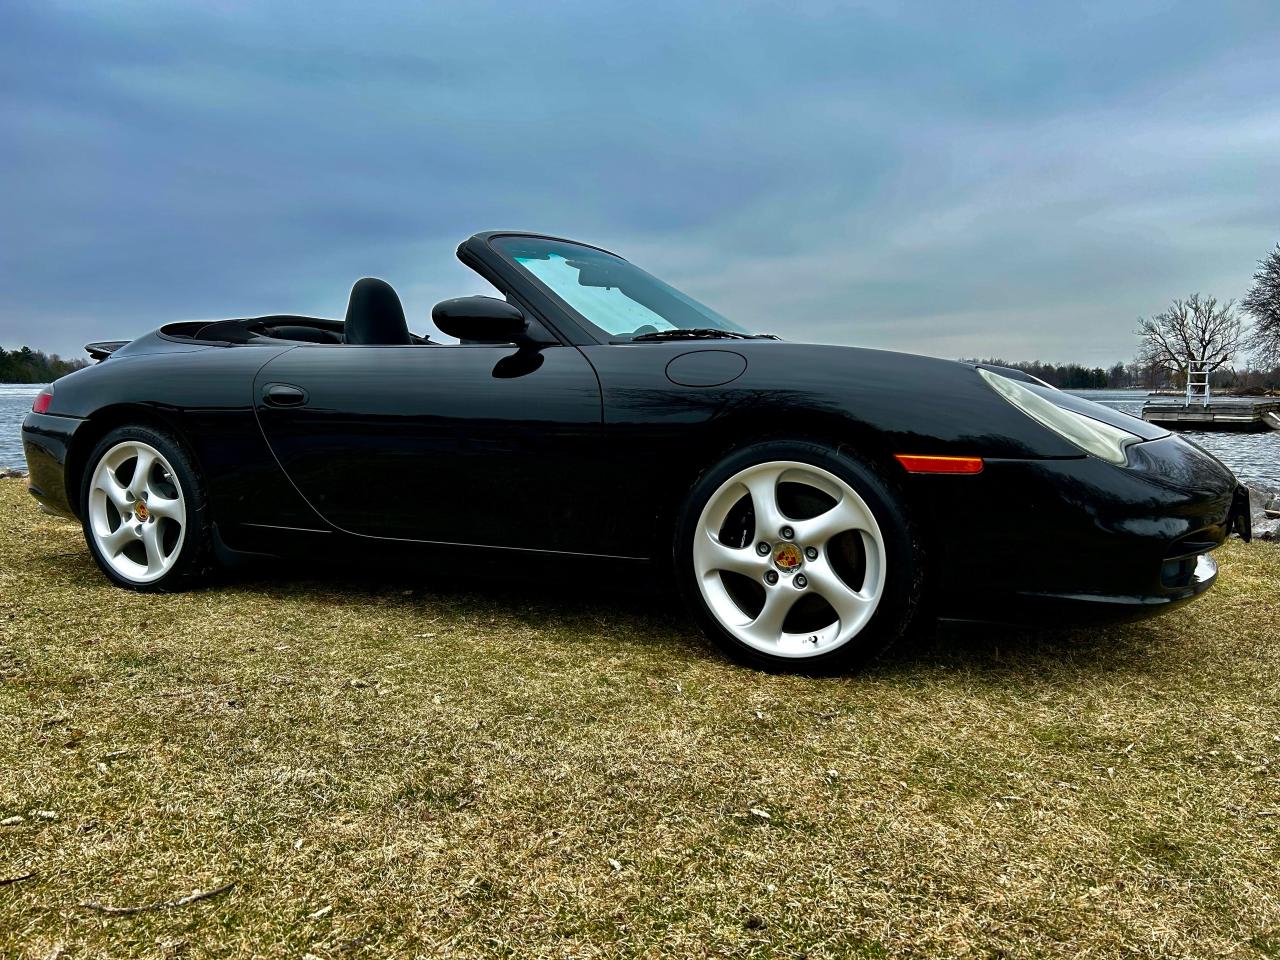 2004 Porsche 911 Convertible  With only 99400 km - Photo #27